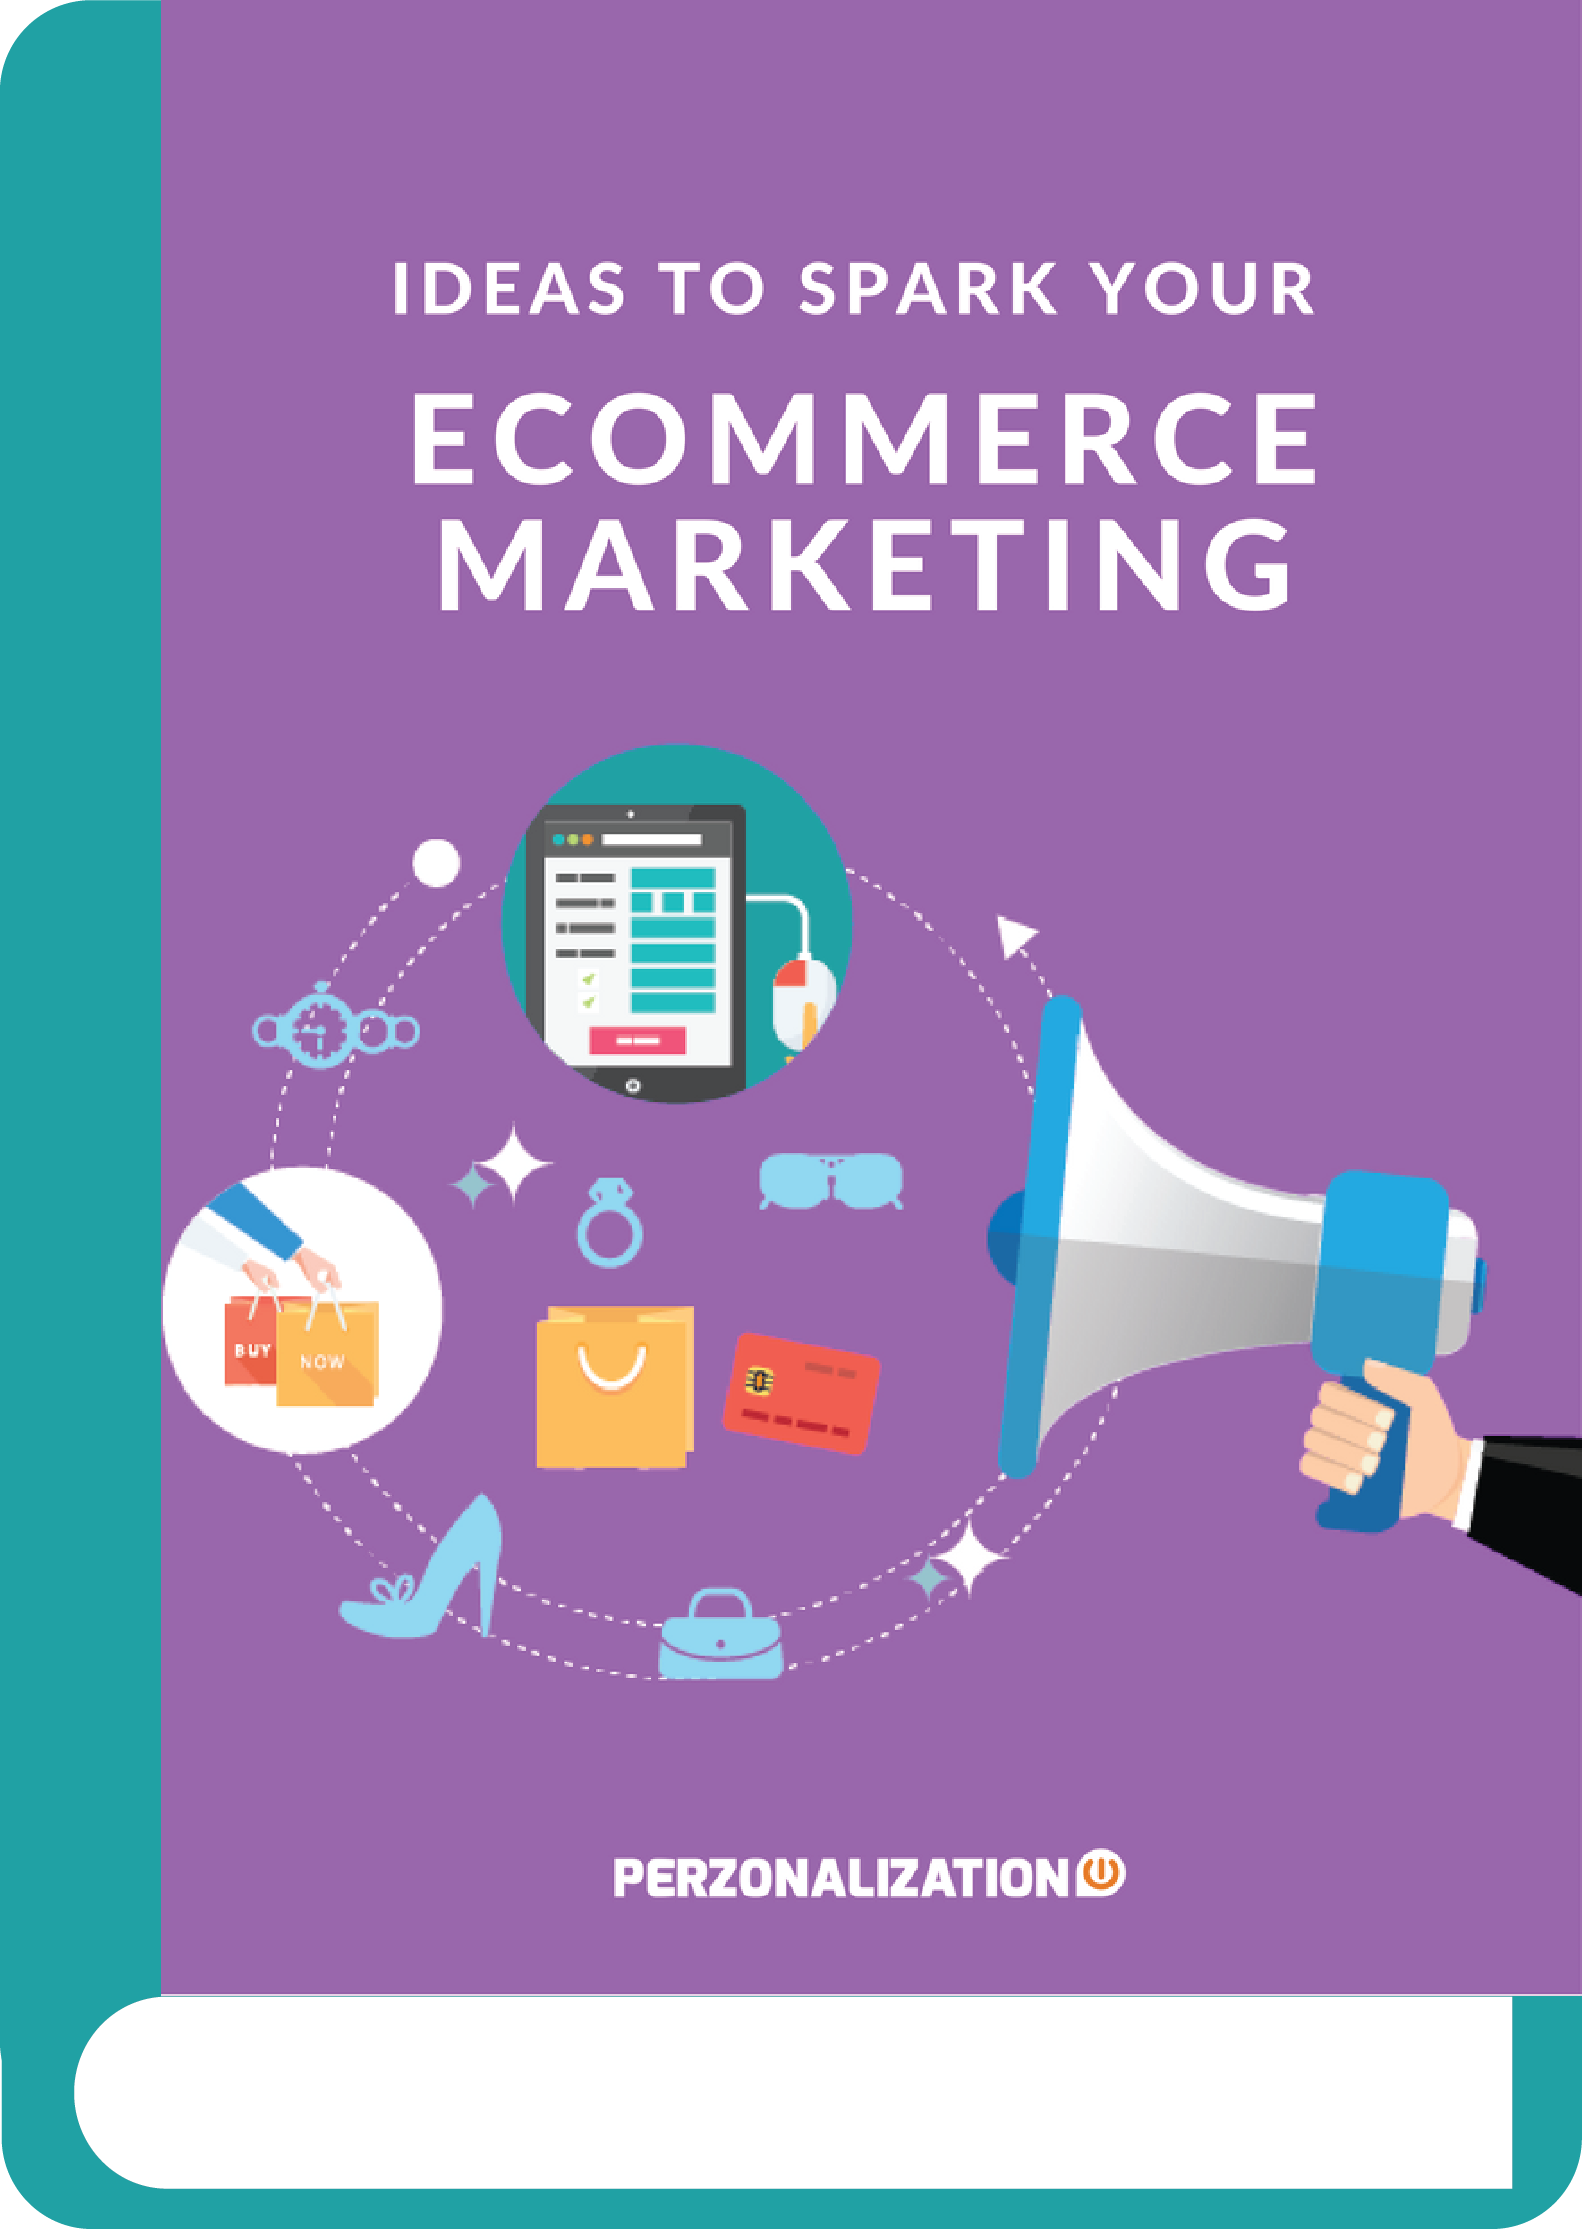 In this free eBook, we have listed some creative and pocket-friendly ways in which eCommerce owners can do eCommerce marketing for their stores